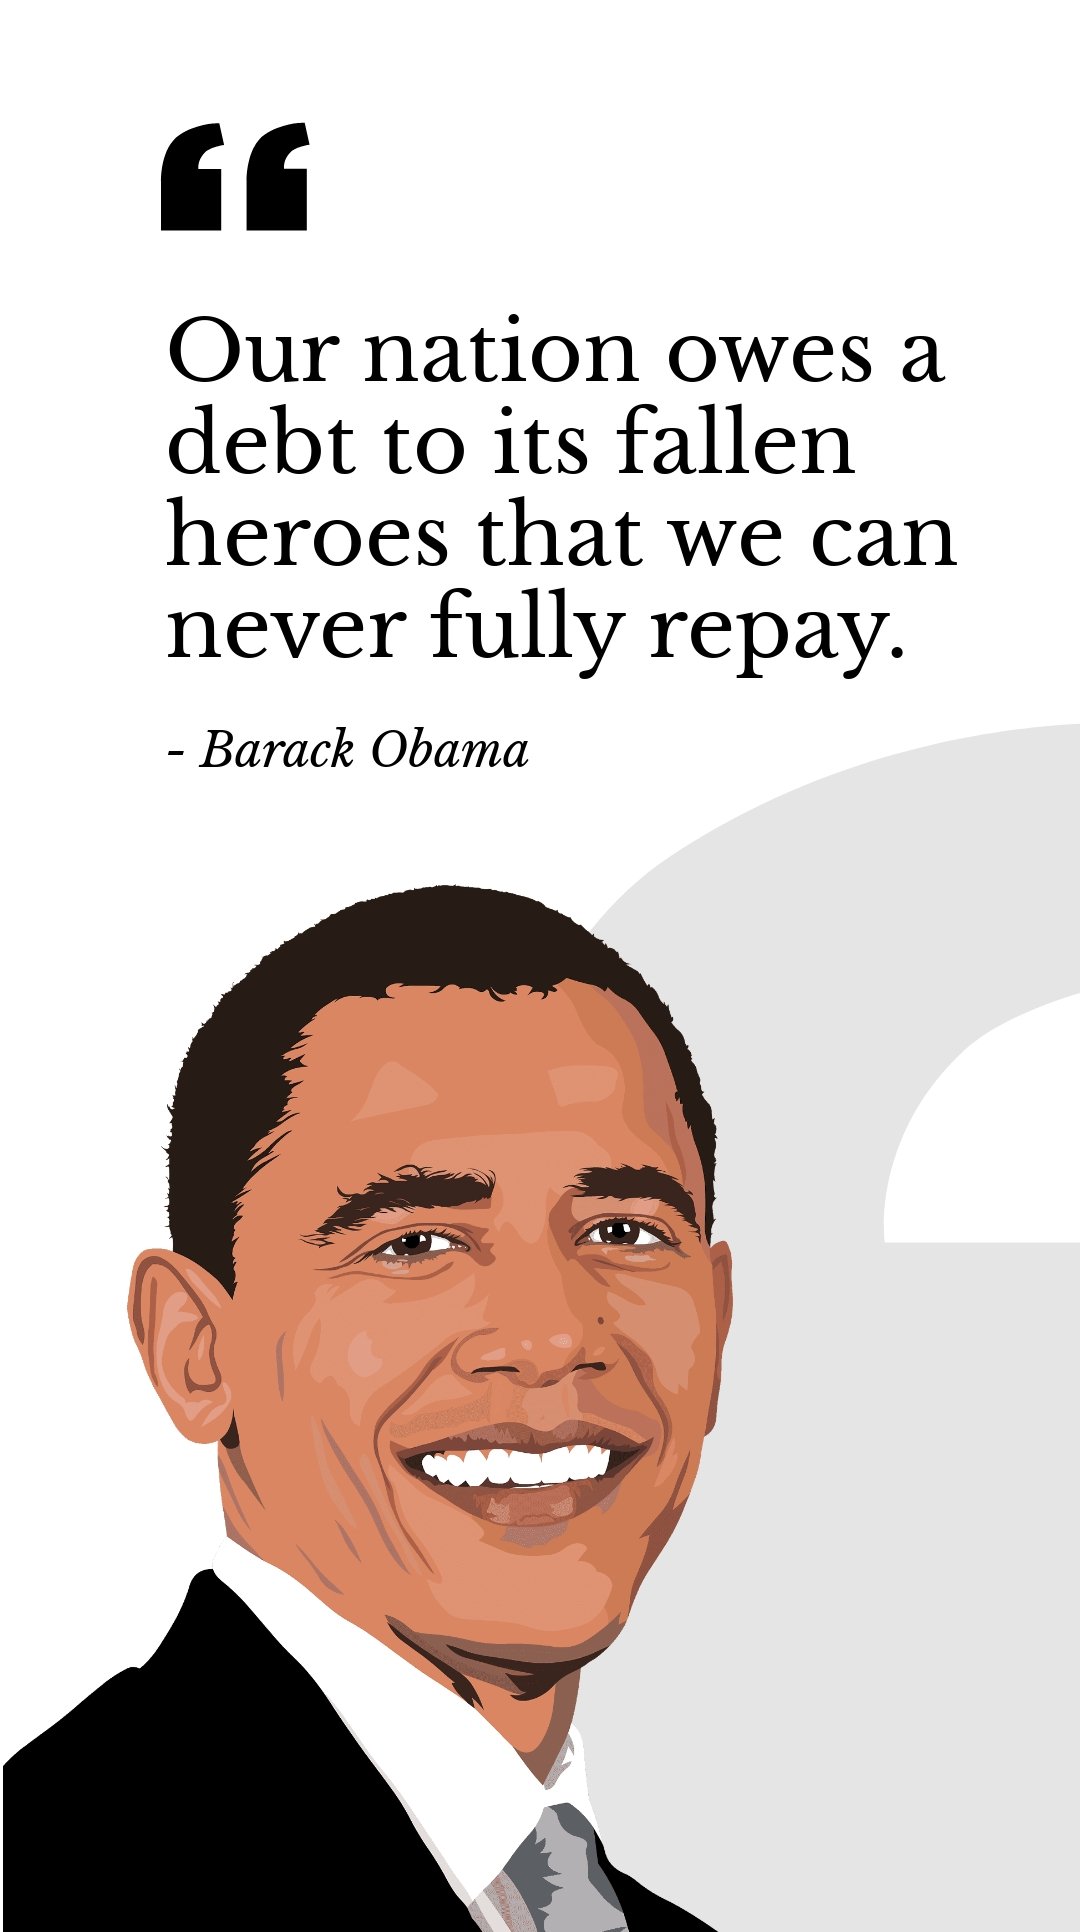 Barack Obama - "Our nation owes a debt to its fallen heroes that we can never fully repay." in JPG